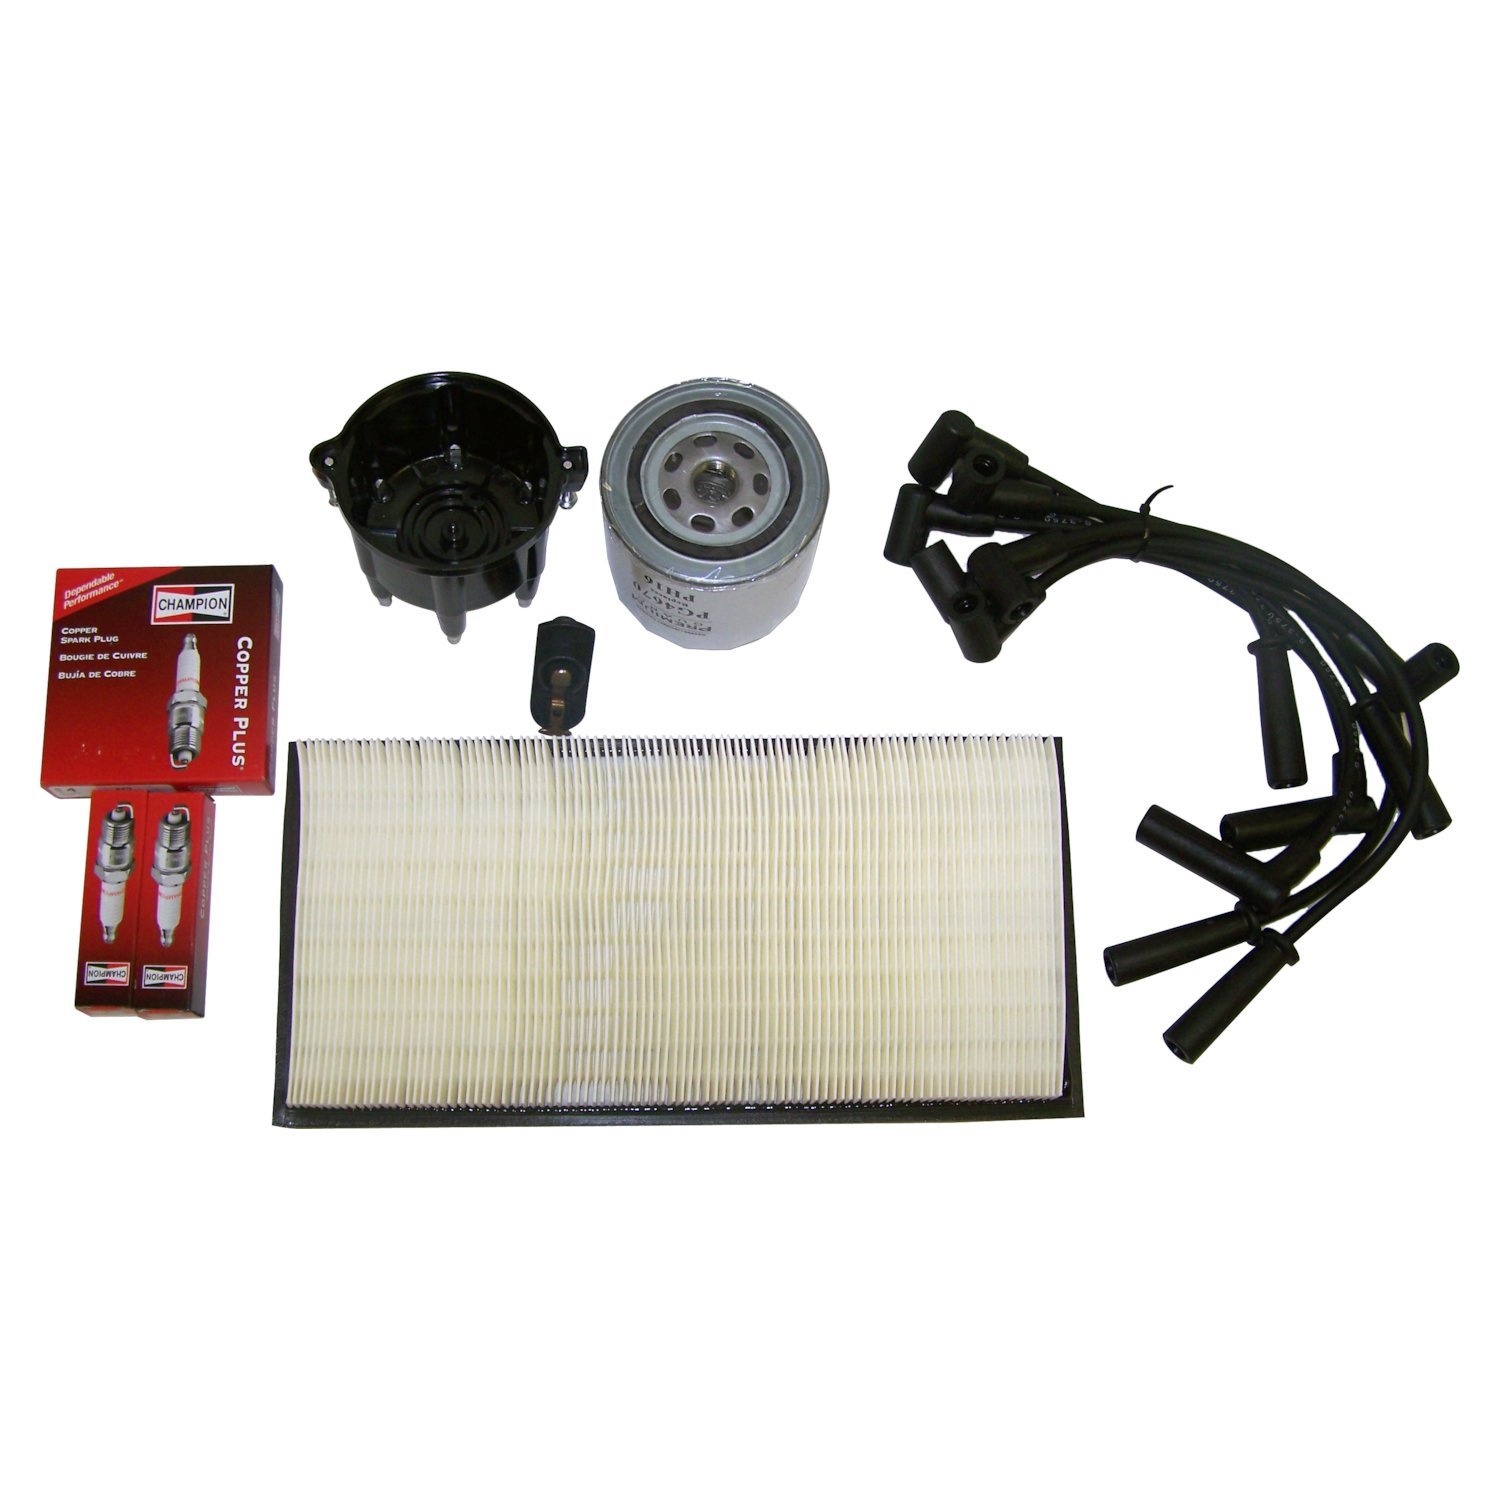 Tune Up Kit for 97-98 Jeep XJ Cherokee w/ 4.0L Engine